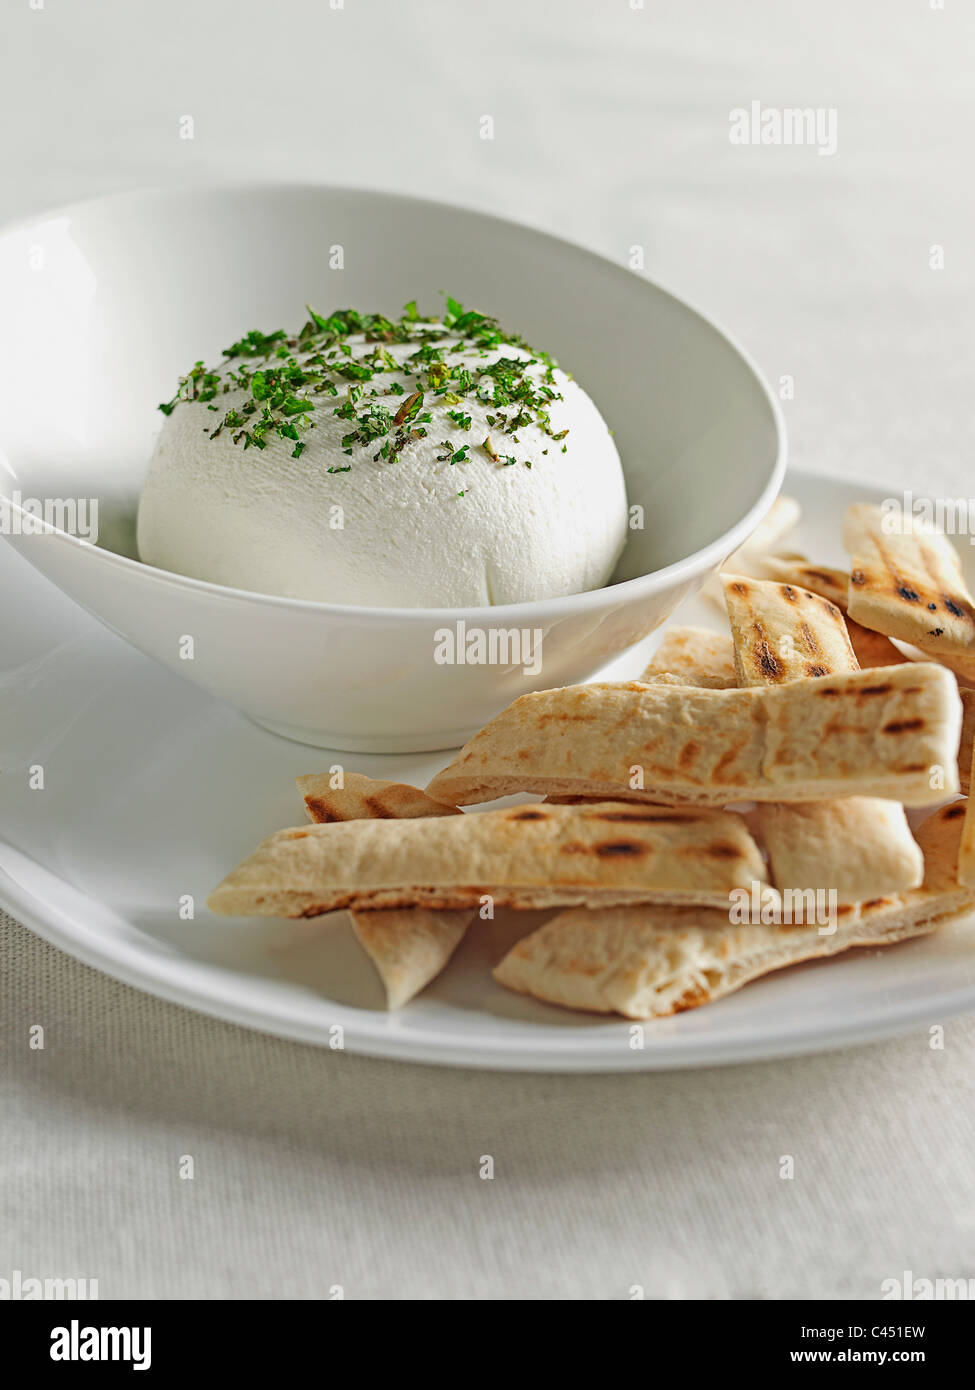 Bowl of cream cheese ball and pitta bread on plate, close-up Stock Photo